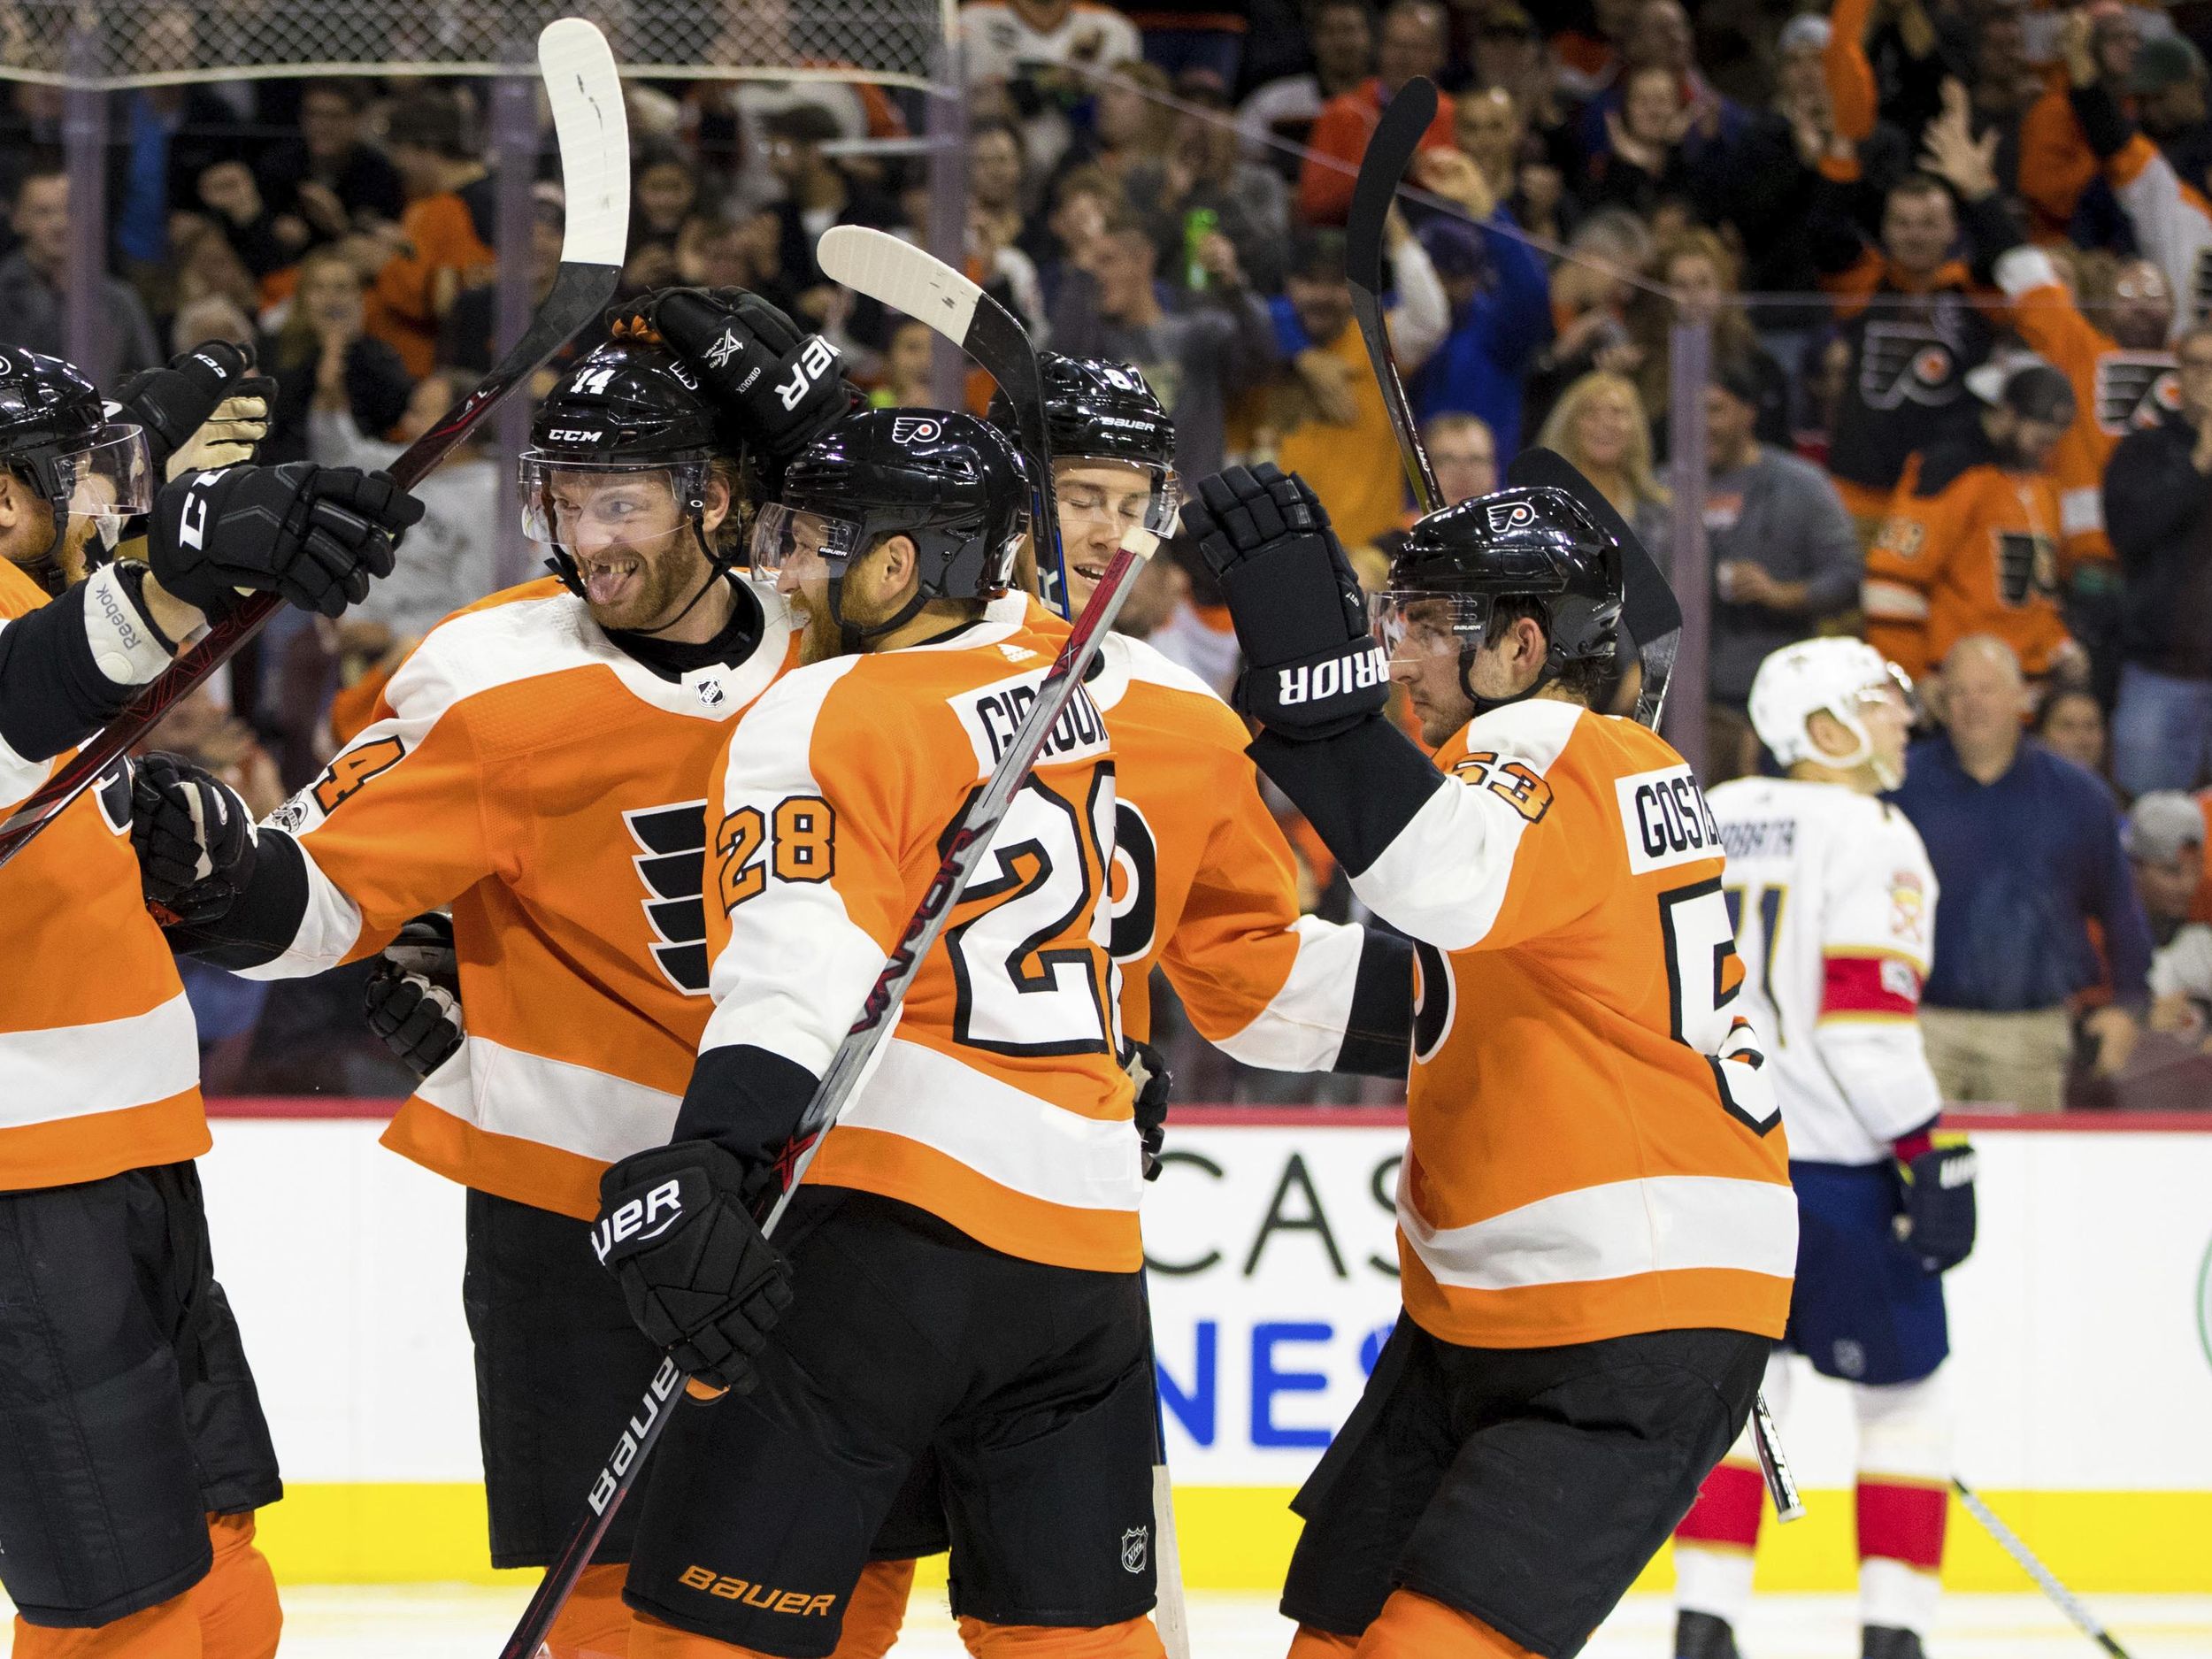 Panthers hold off Flyers' second-period surge for a 6-3 victory